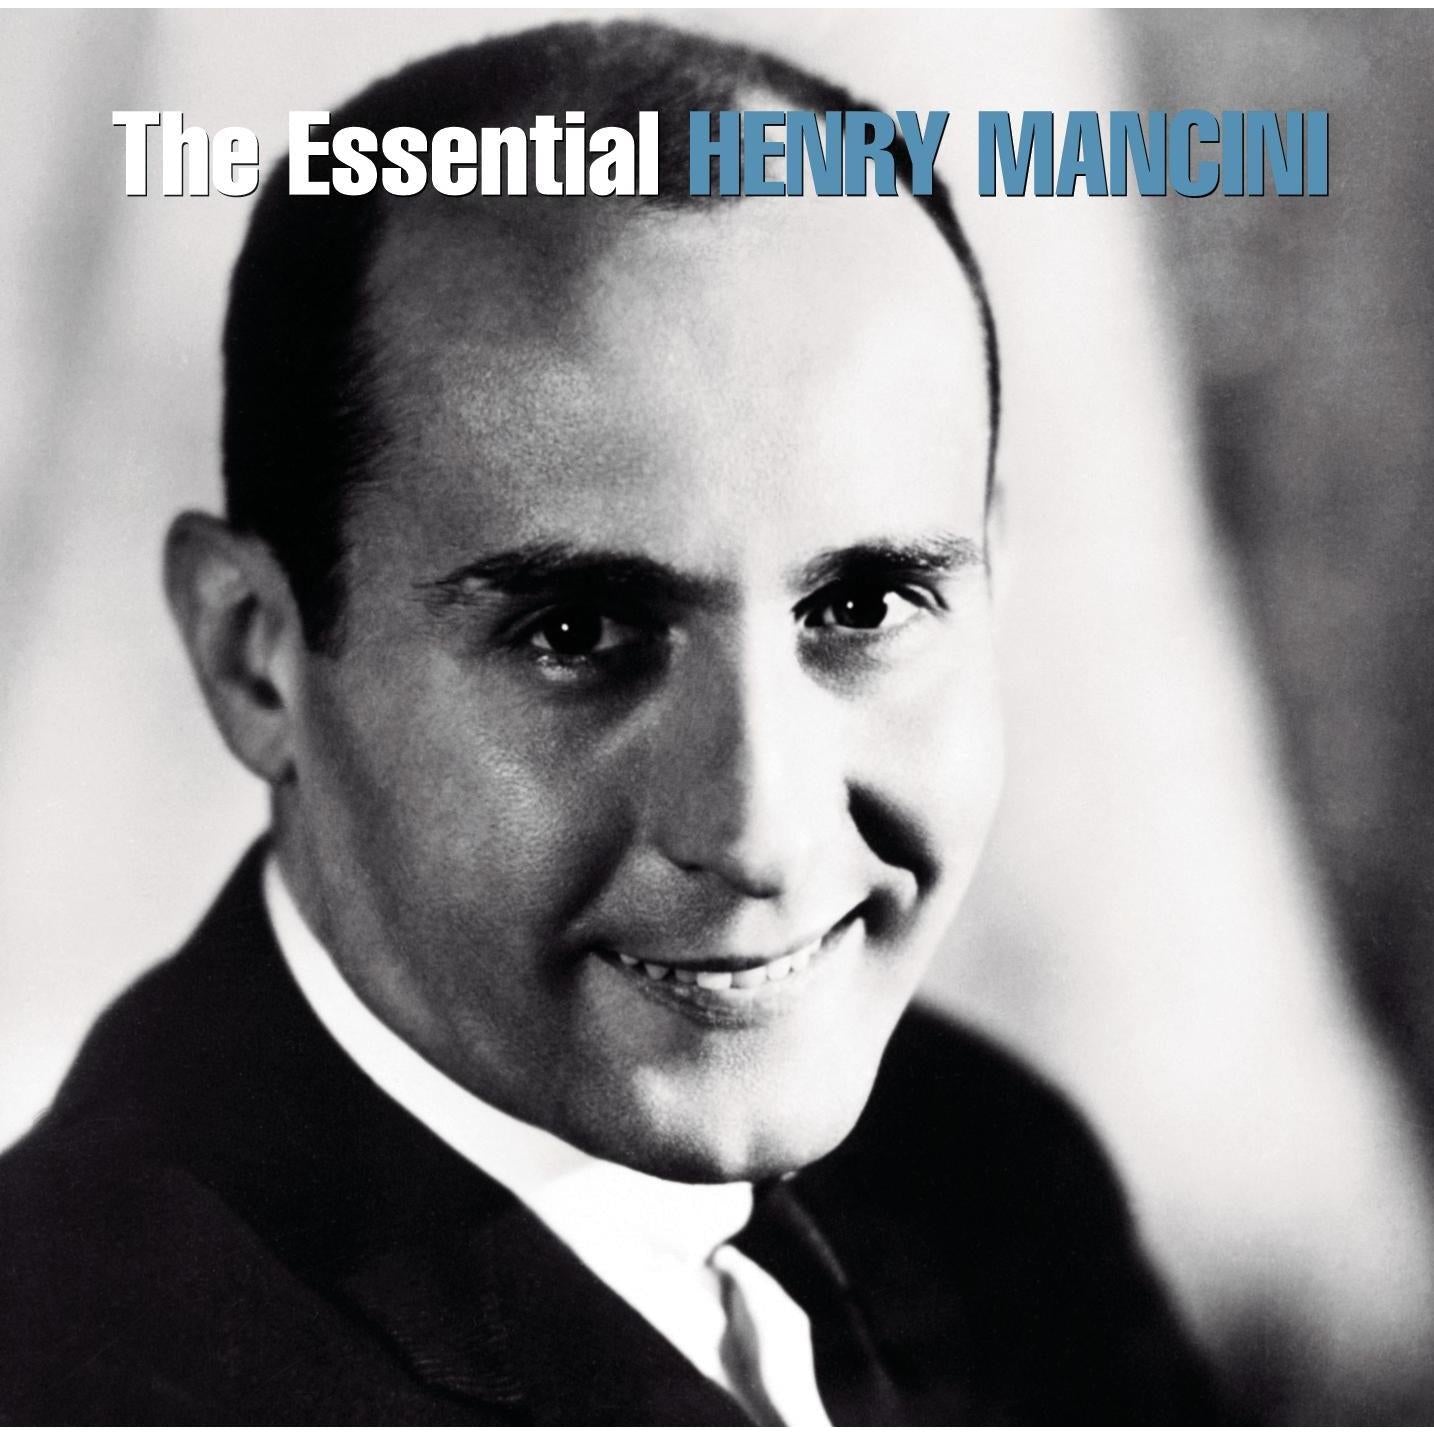 essential henry mancini, the (reissue)